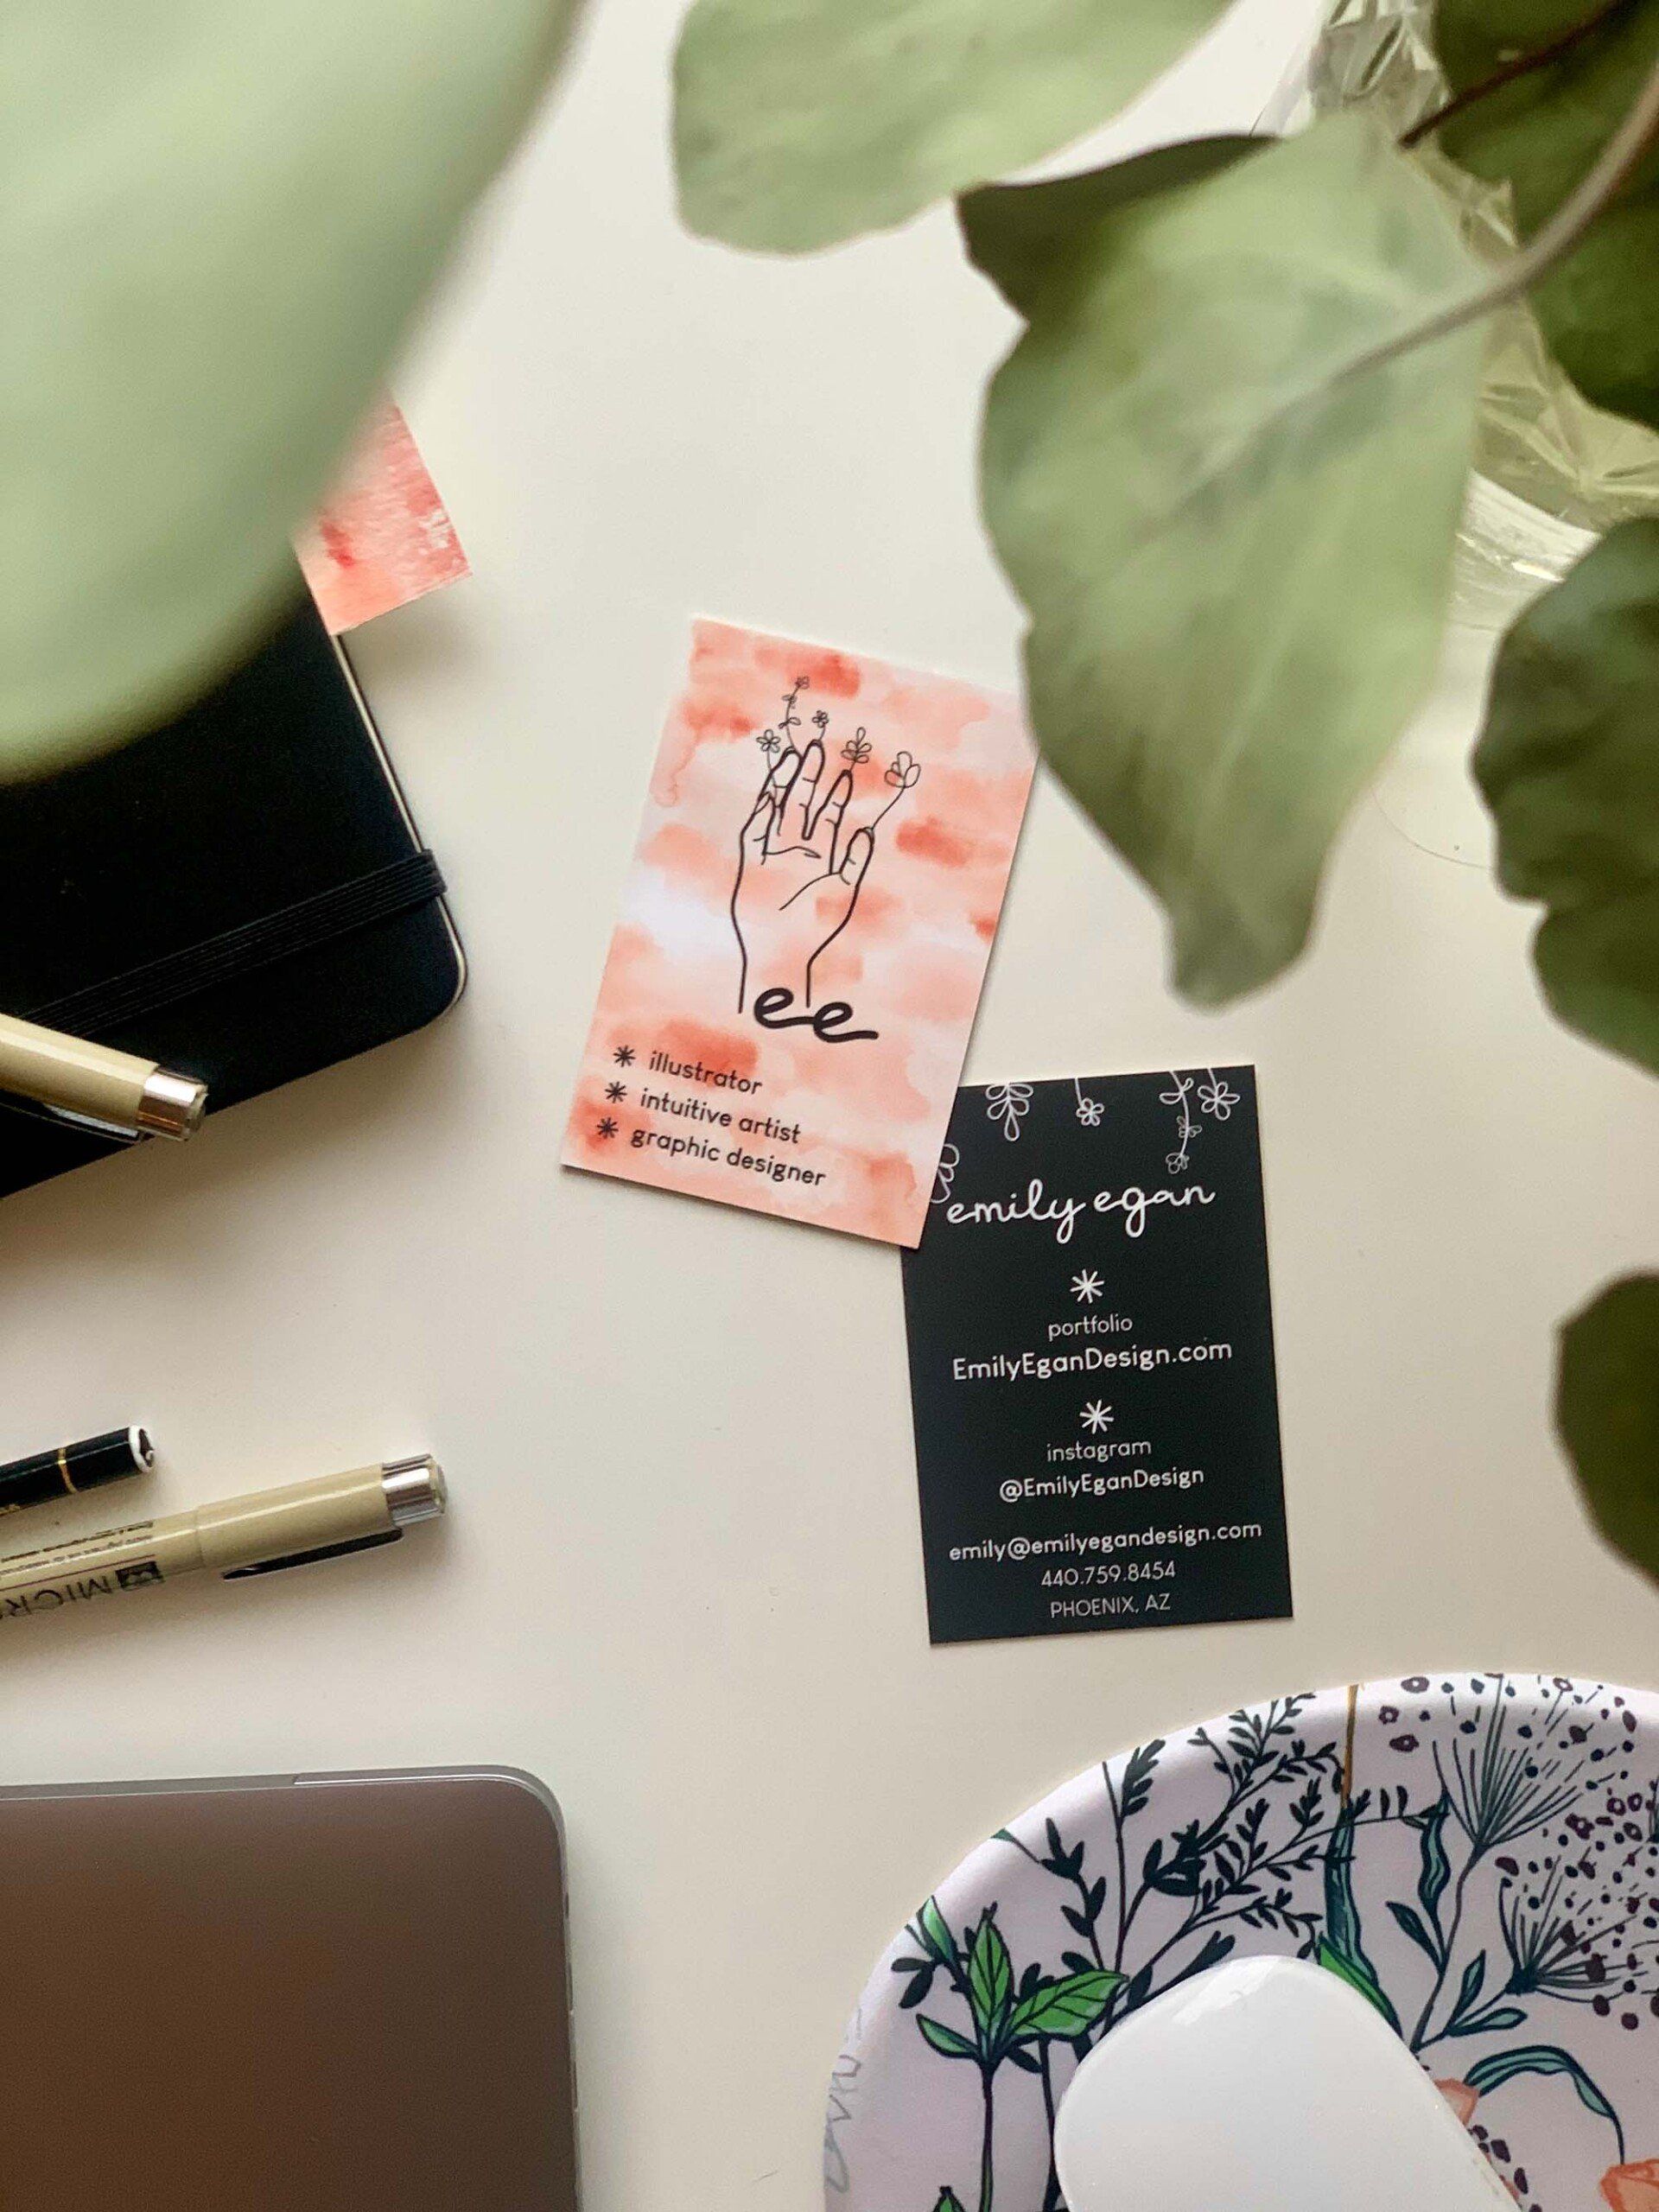 photo of Emily Egan's business card front and back with a notebook, Mircon pens, a pencil, the top right corner of a macbook, and part of a mouse and mousepad all showing on a white desk taken from an angle showing a eucalyptus plant in the foreground.